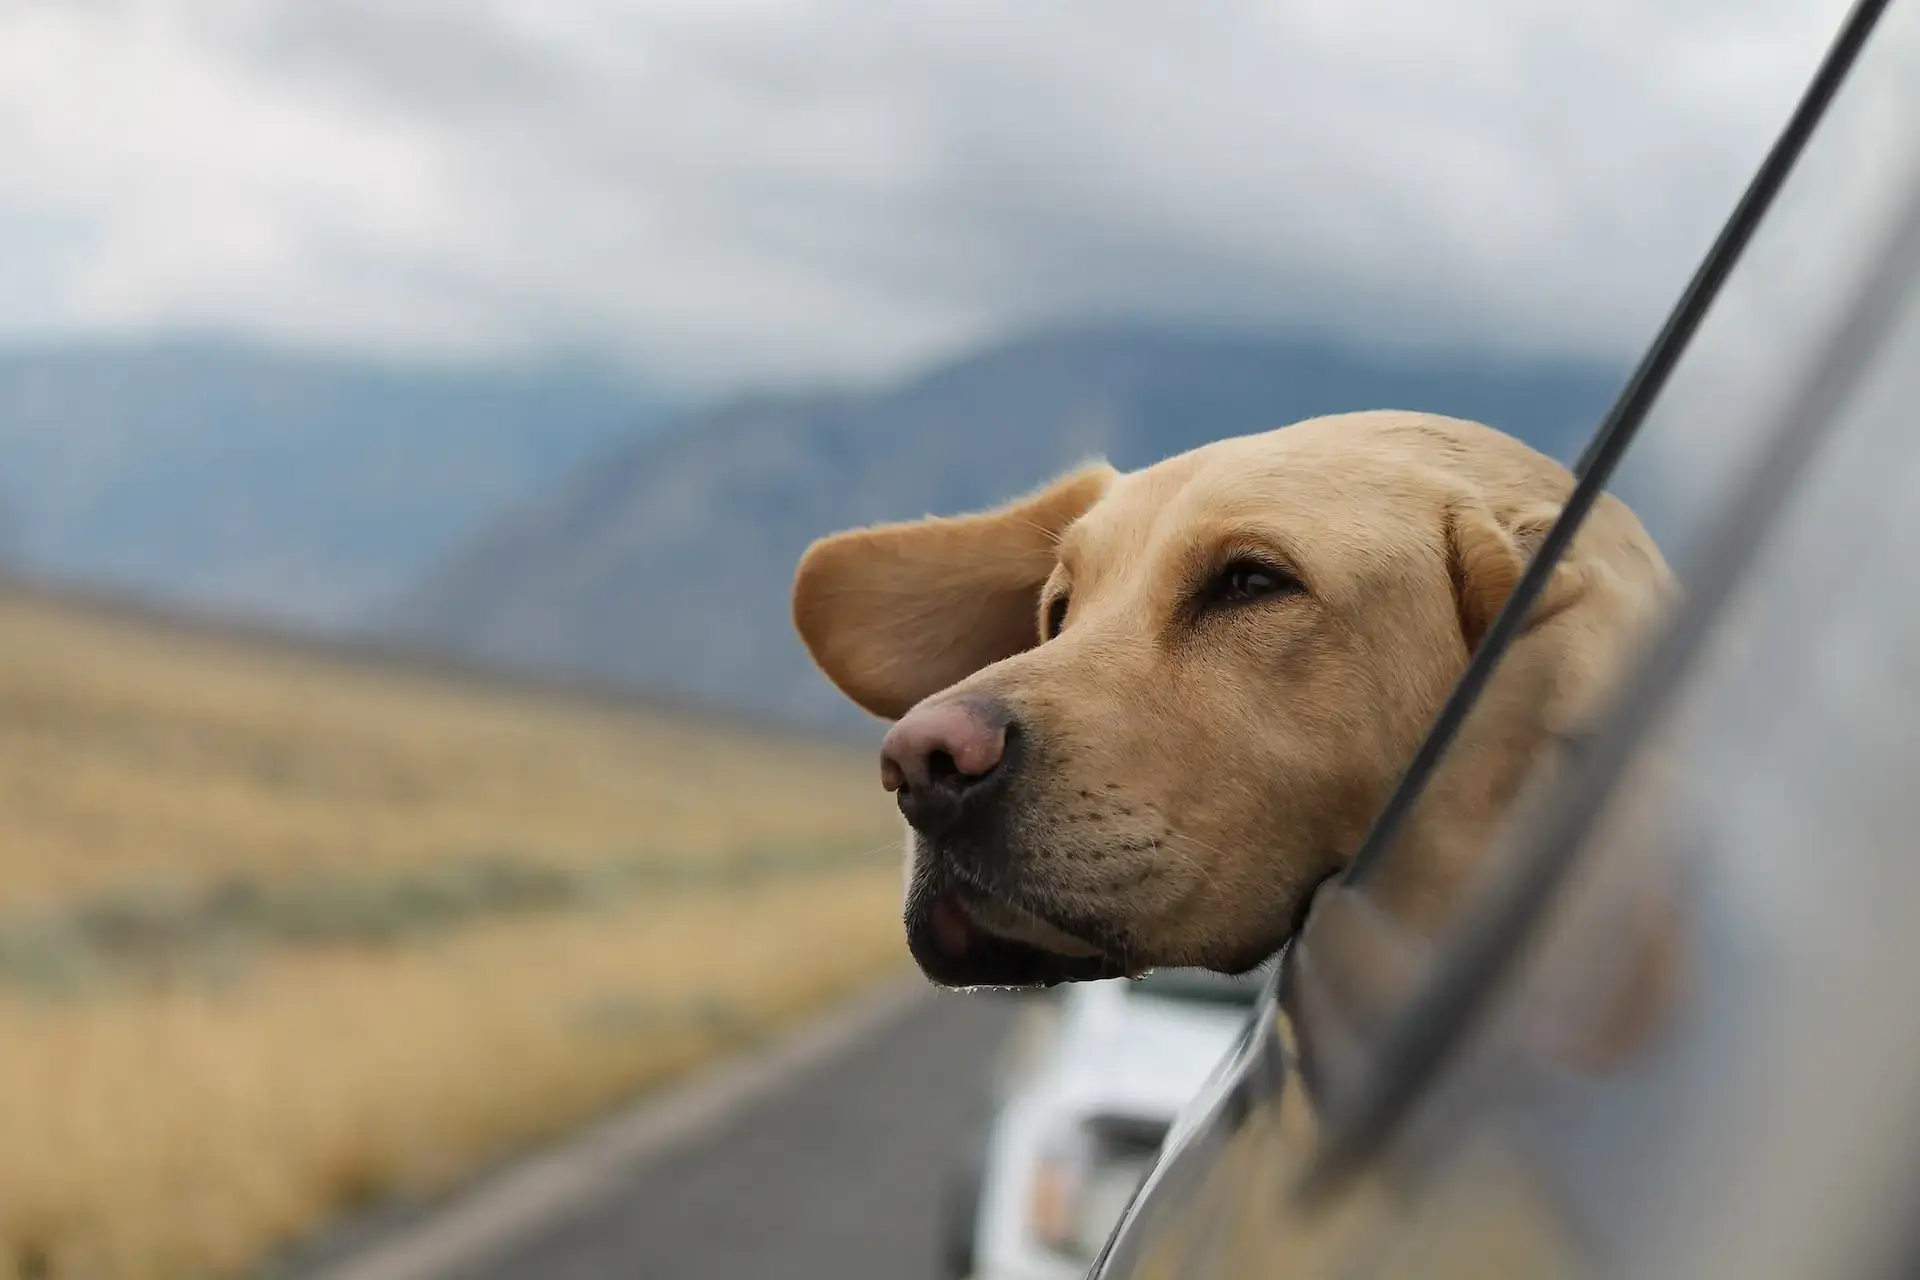 Dog sticking head out window during car ride